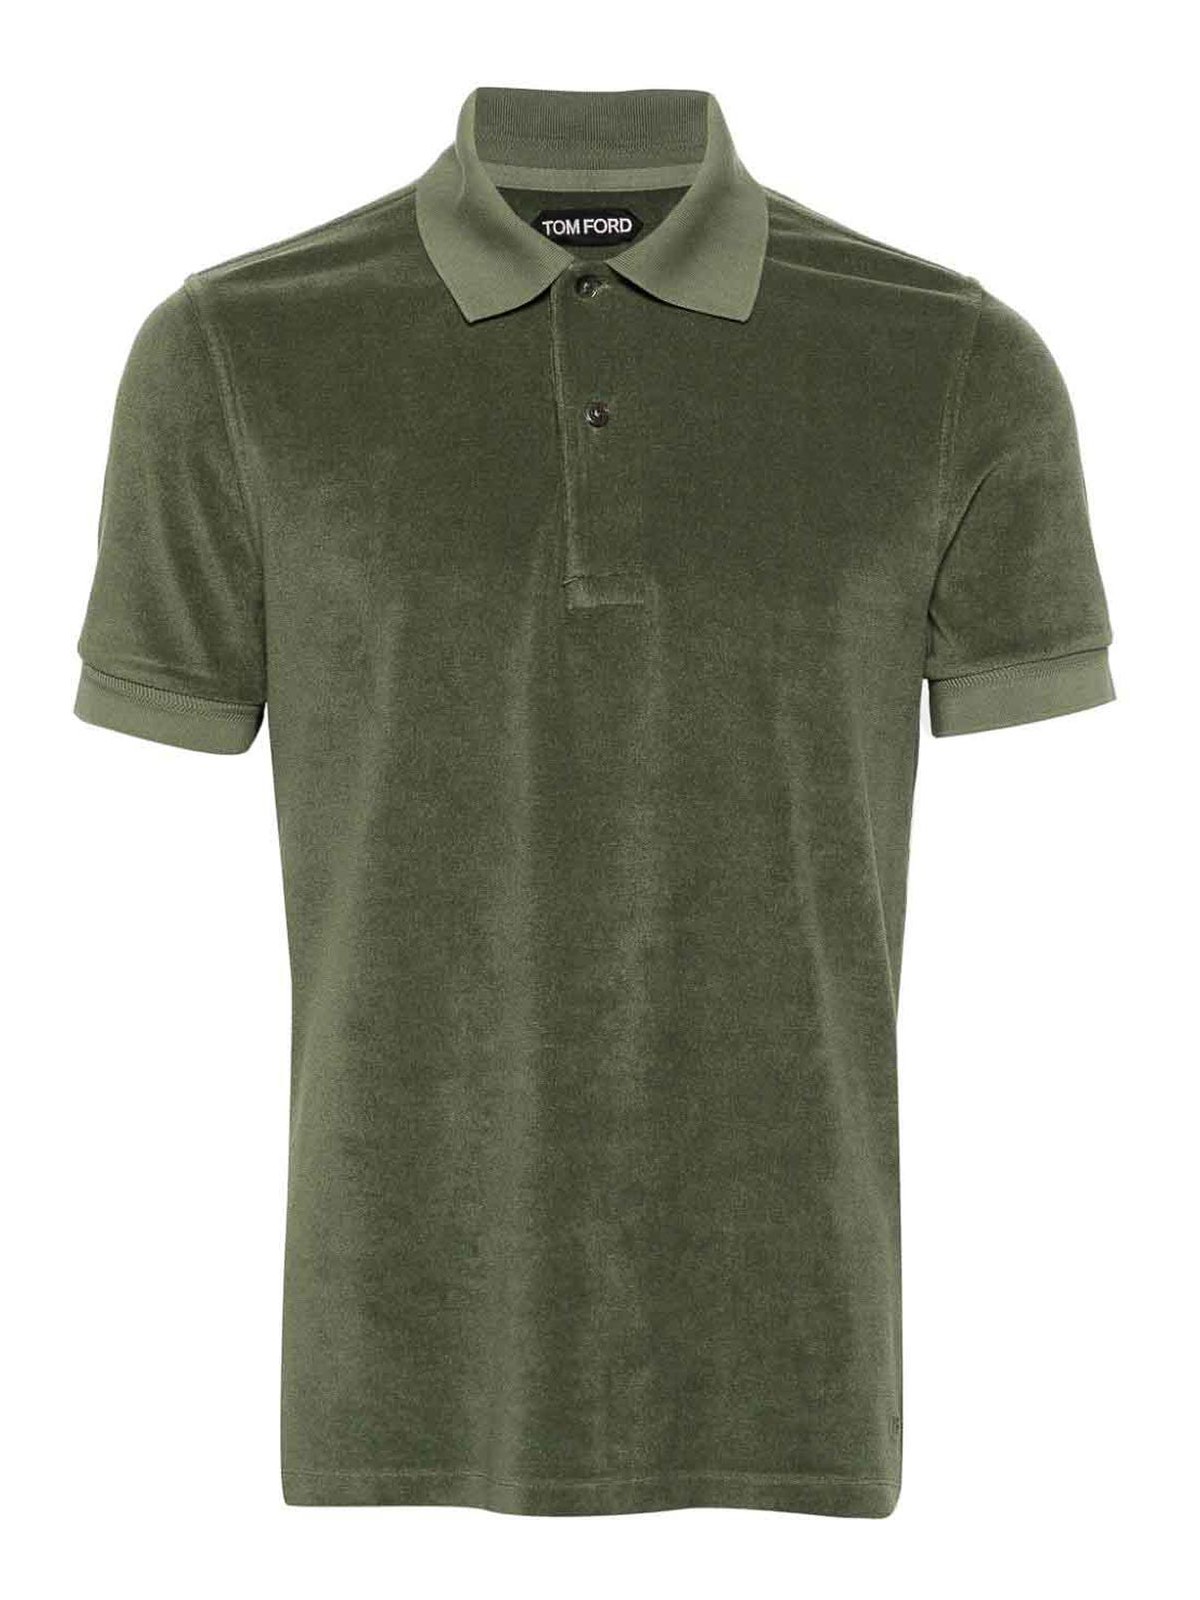 TOM FORD MOSS GREEN TOWELLING POLO SHIRT